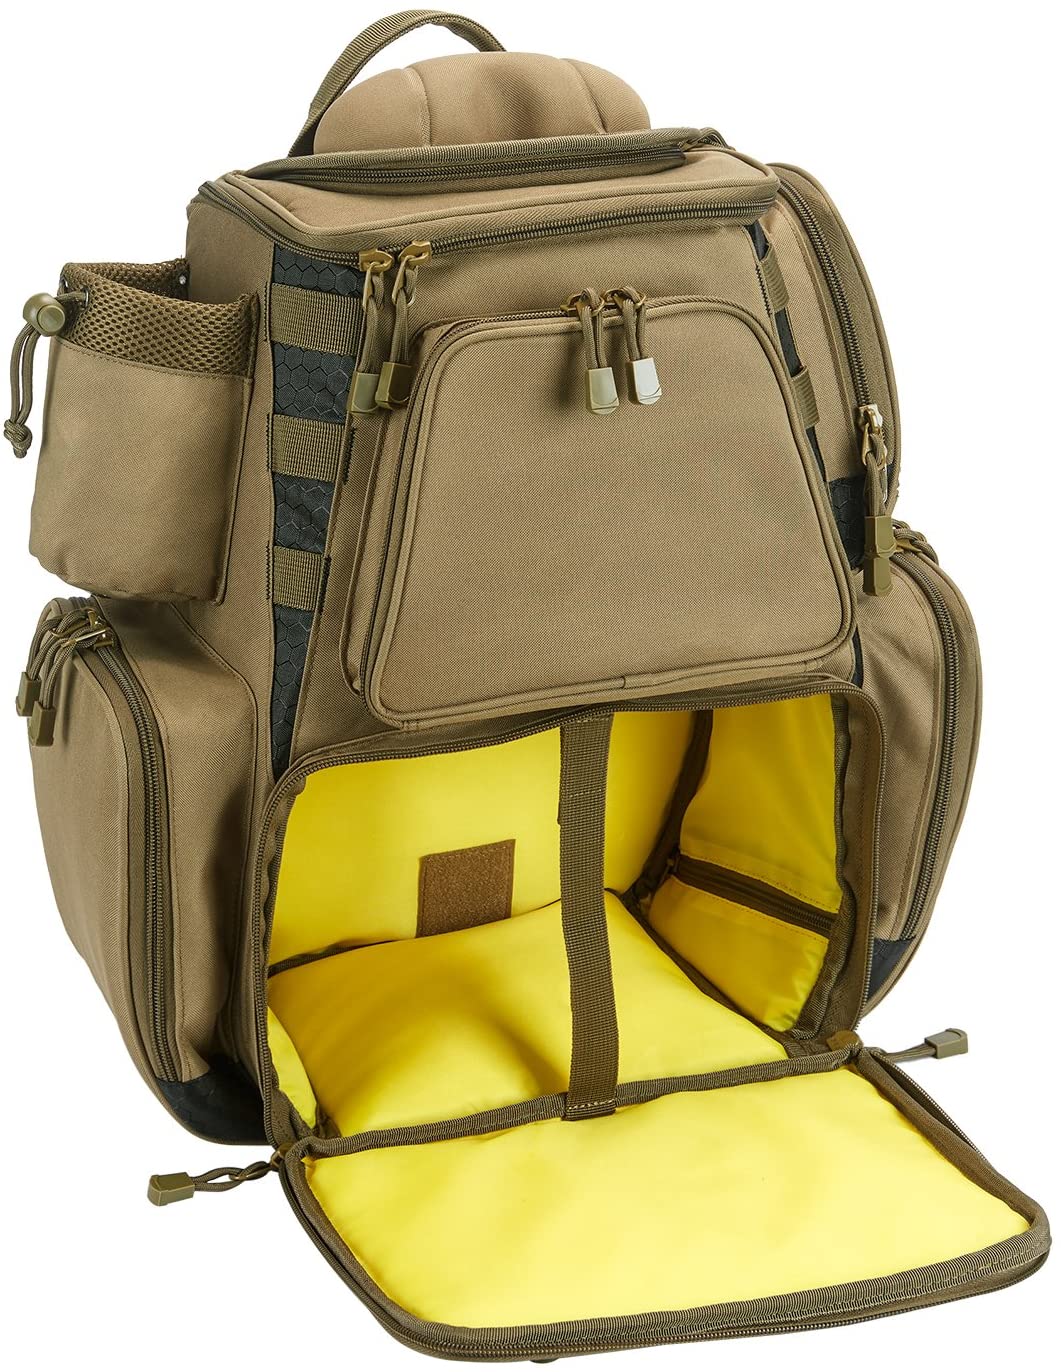 Best Fishing Backpack Under 100 Our Top 5 Picks!